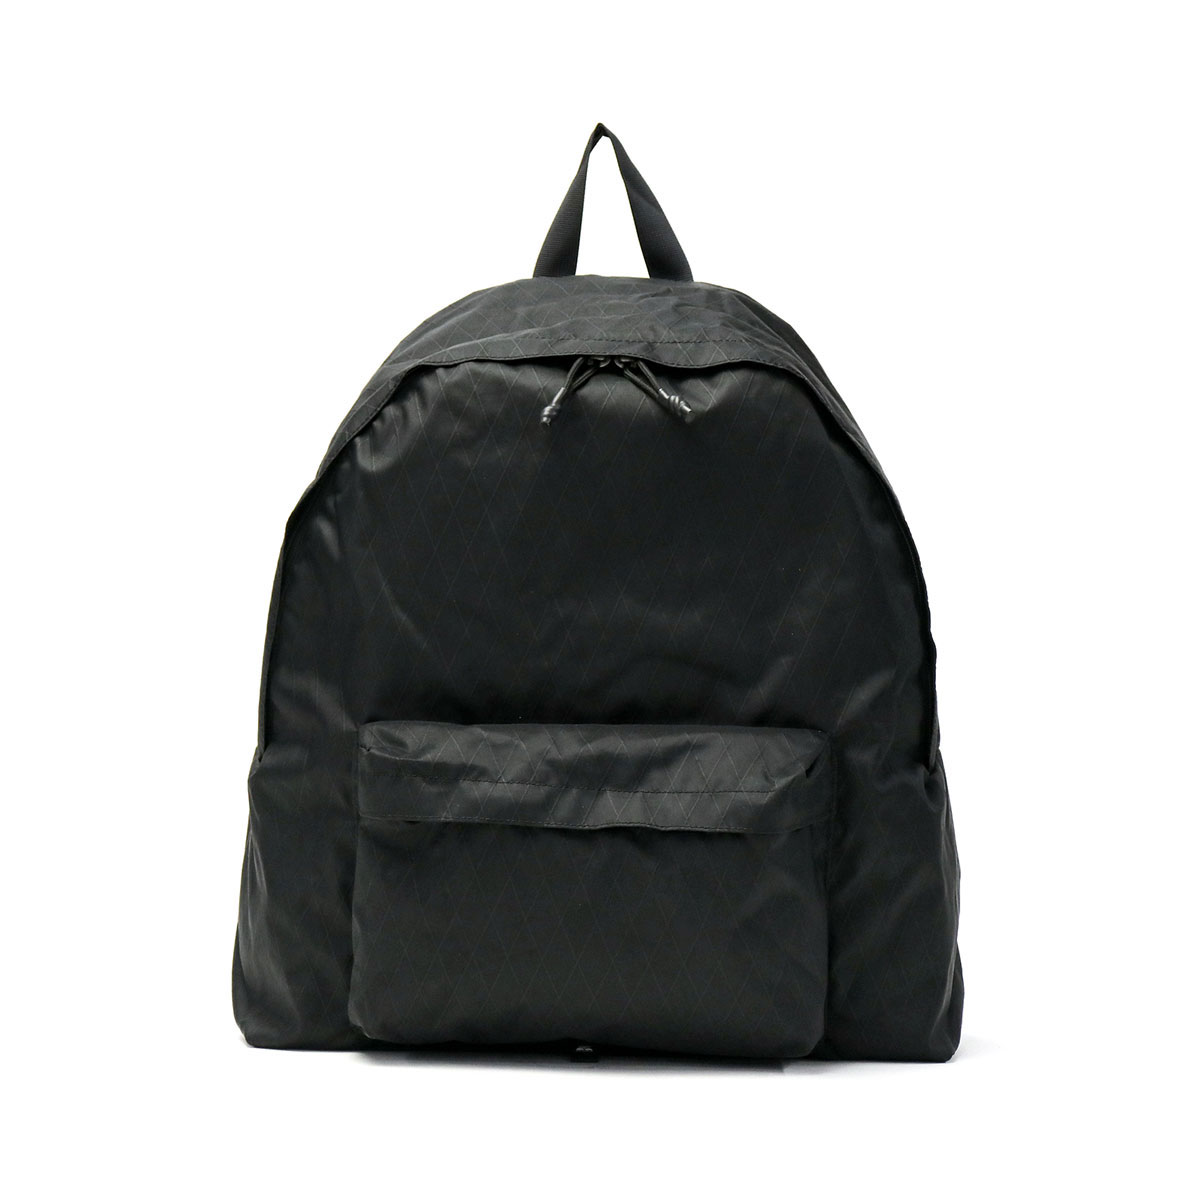 MAKAVELIC マキャベリック RICO LO TECH DAYPACK 3109-10114｜【正規